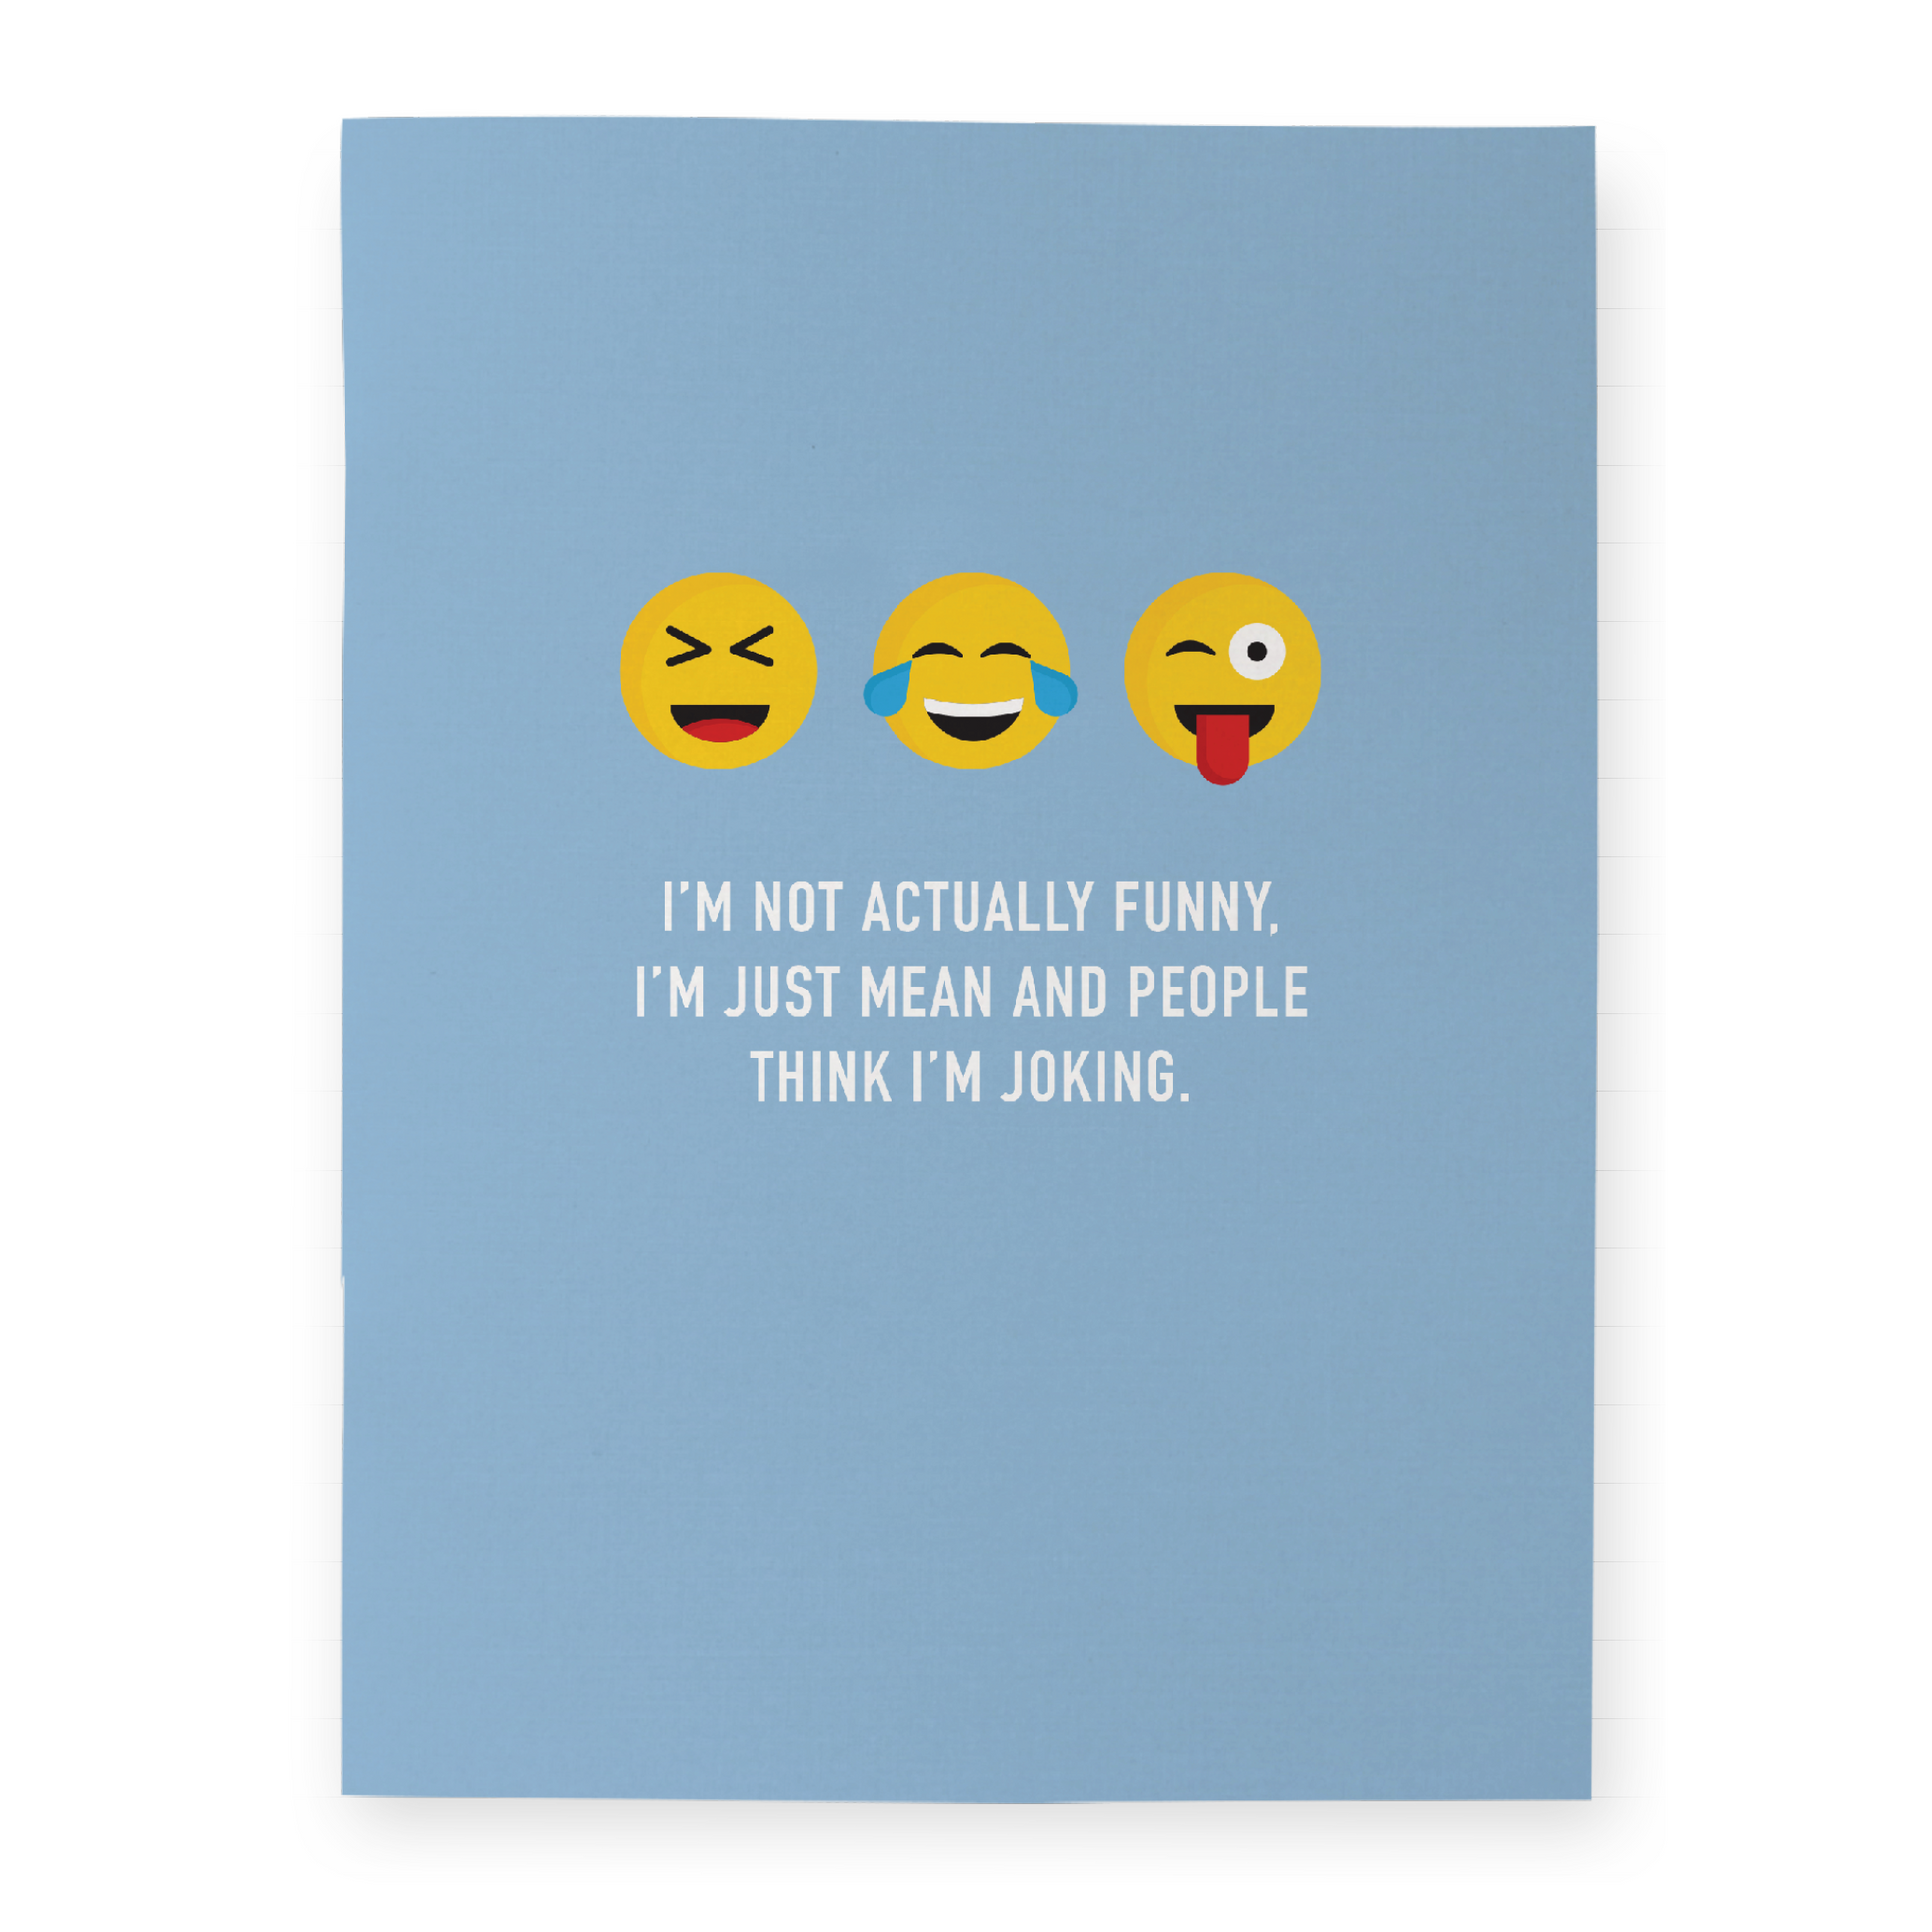 I'm Not Actually Funy, I'm Just Mean And People Think I'm Joking - Pocket Notebook - Mellow Monkey